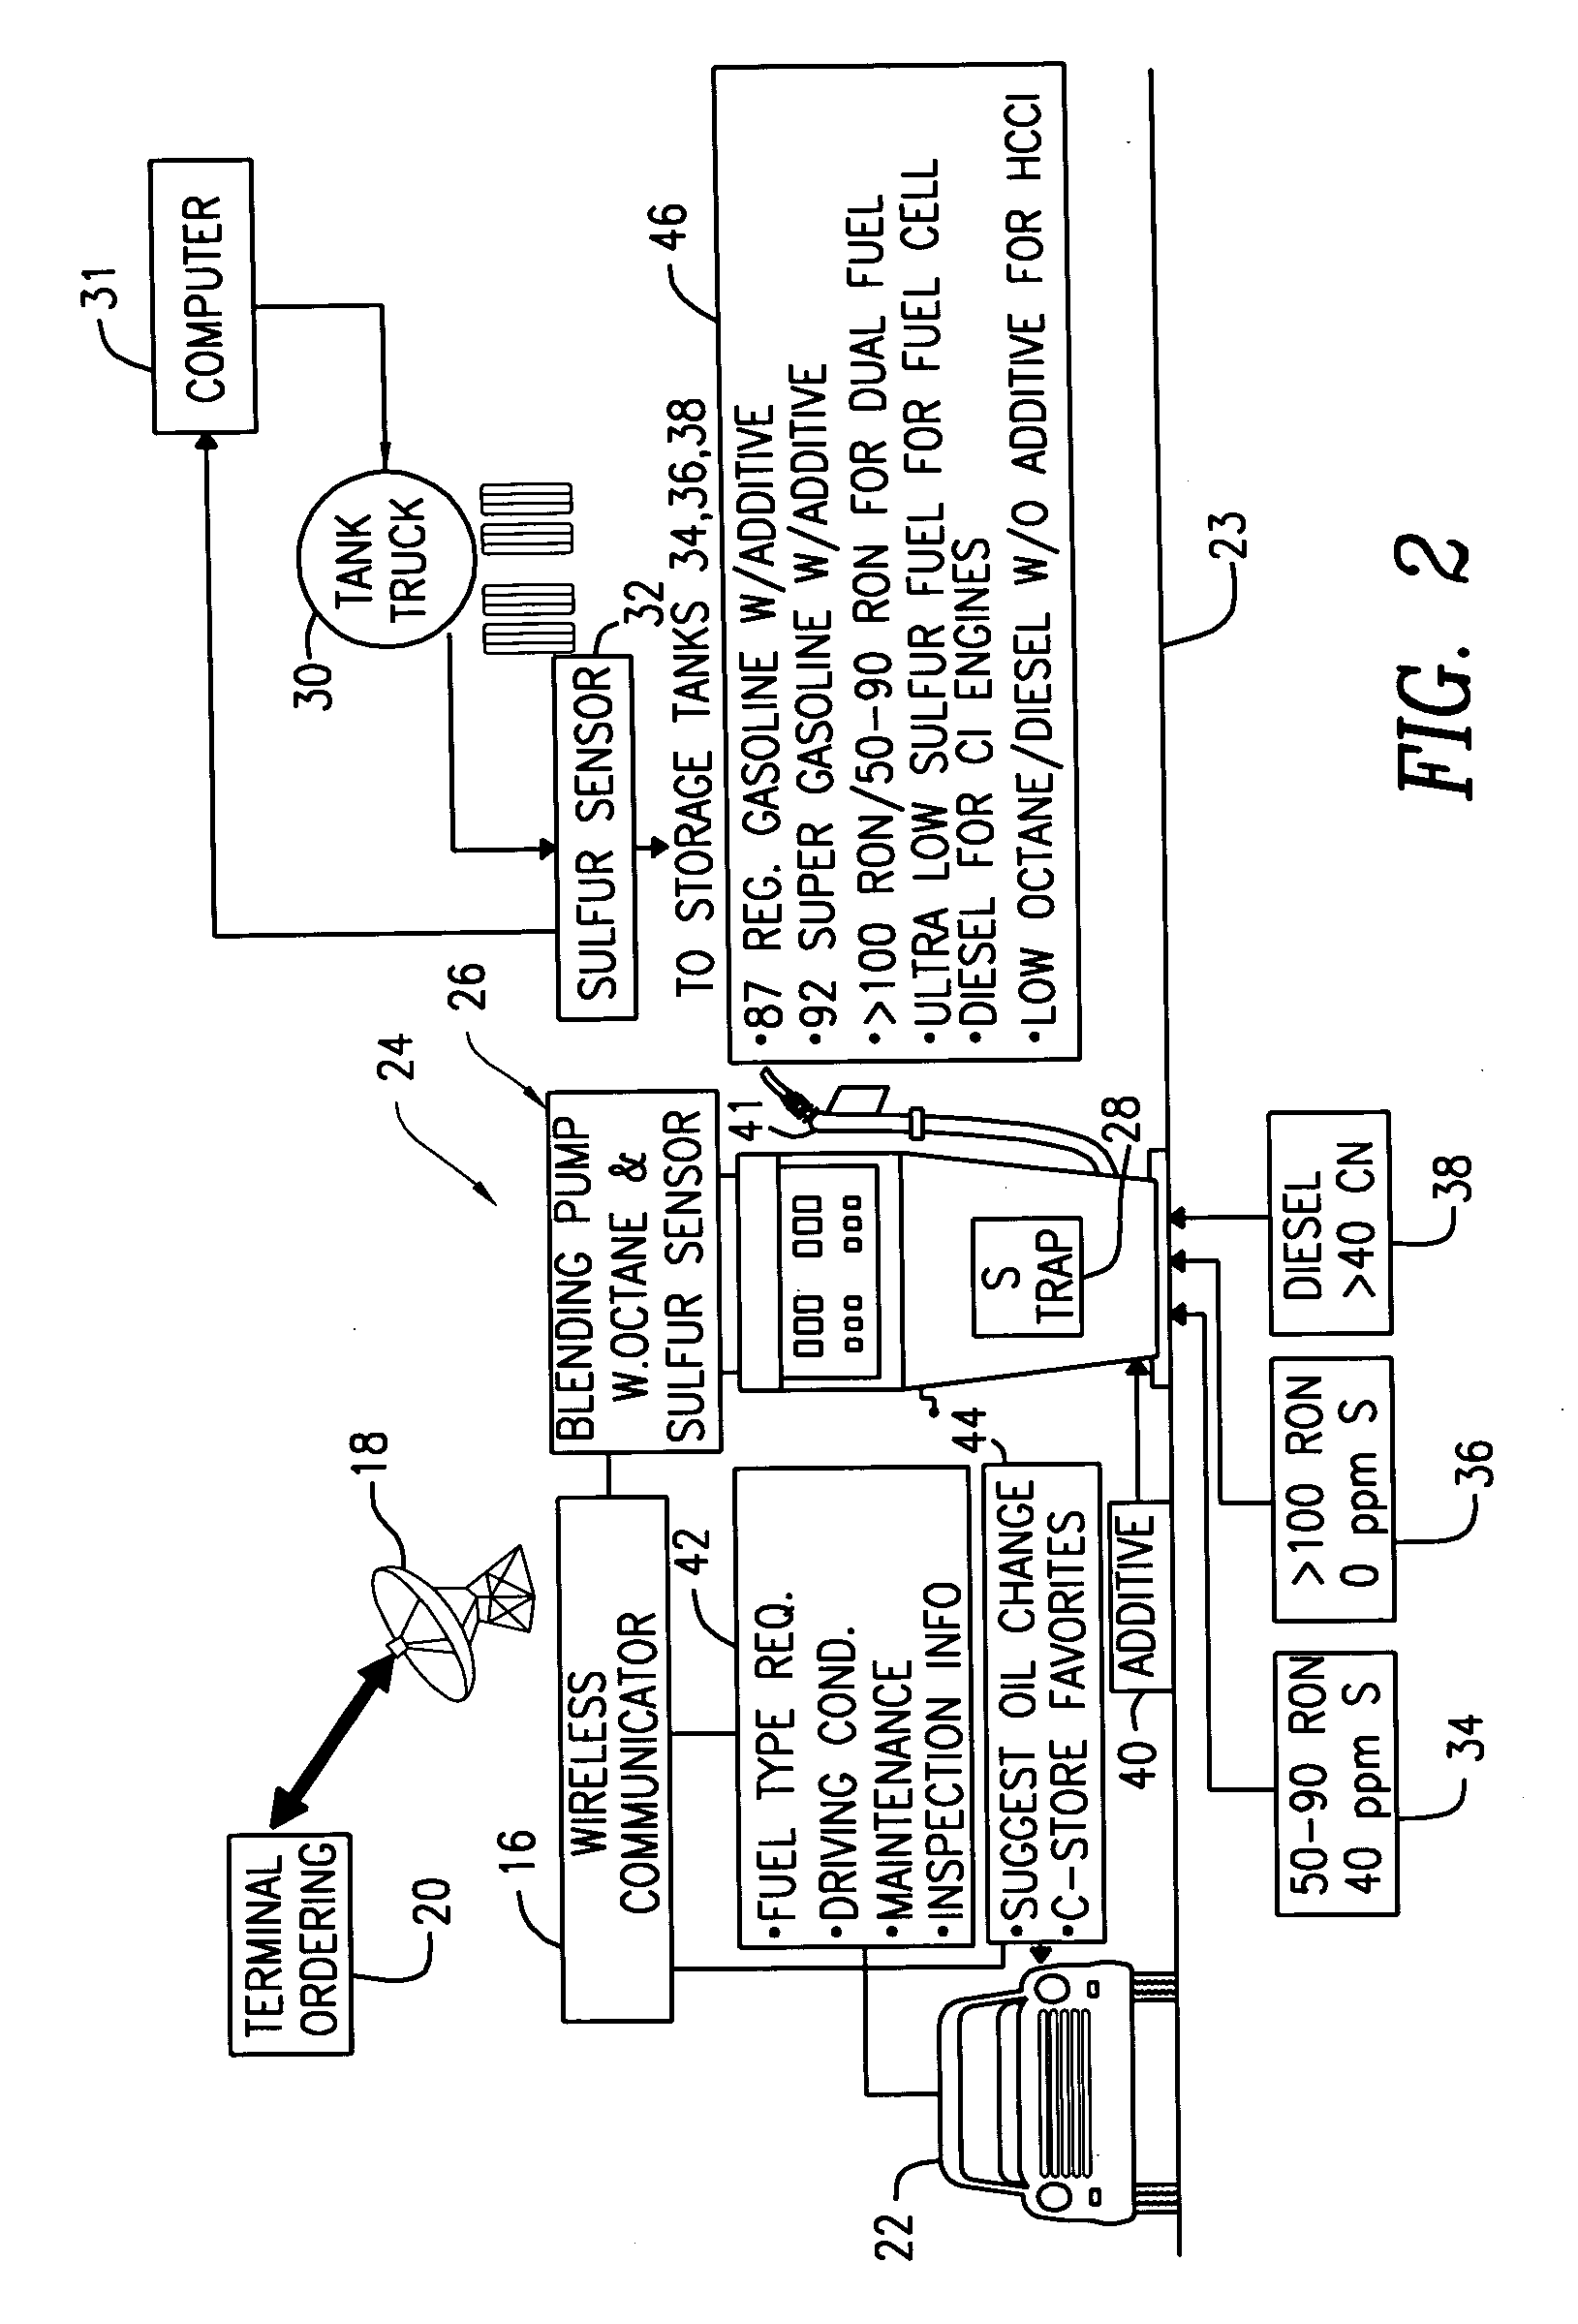 Service station for serving requirements of multiple vehicle technologies